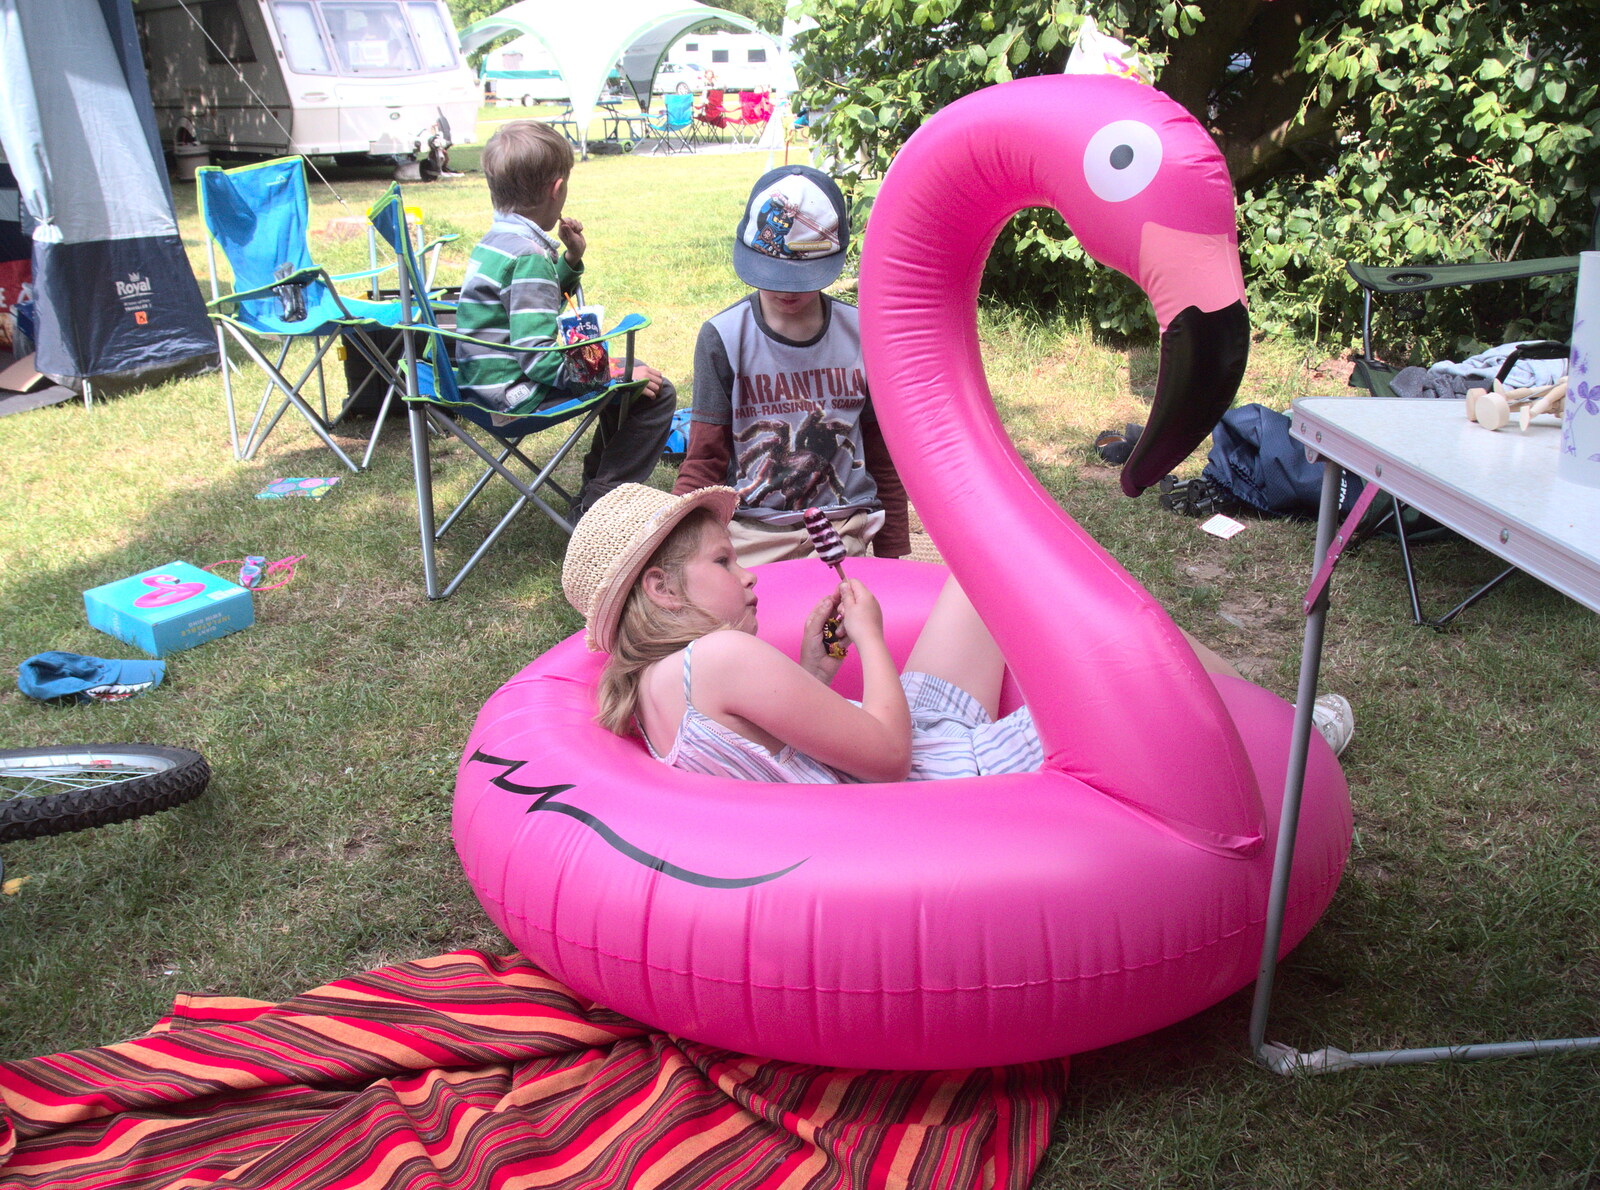 Grace lolls around in a big inflatable flamingo from Dower House Camping, West Harling, Norfolk - 27th May 2018